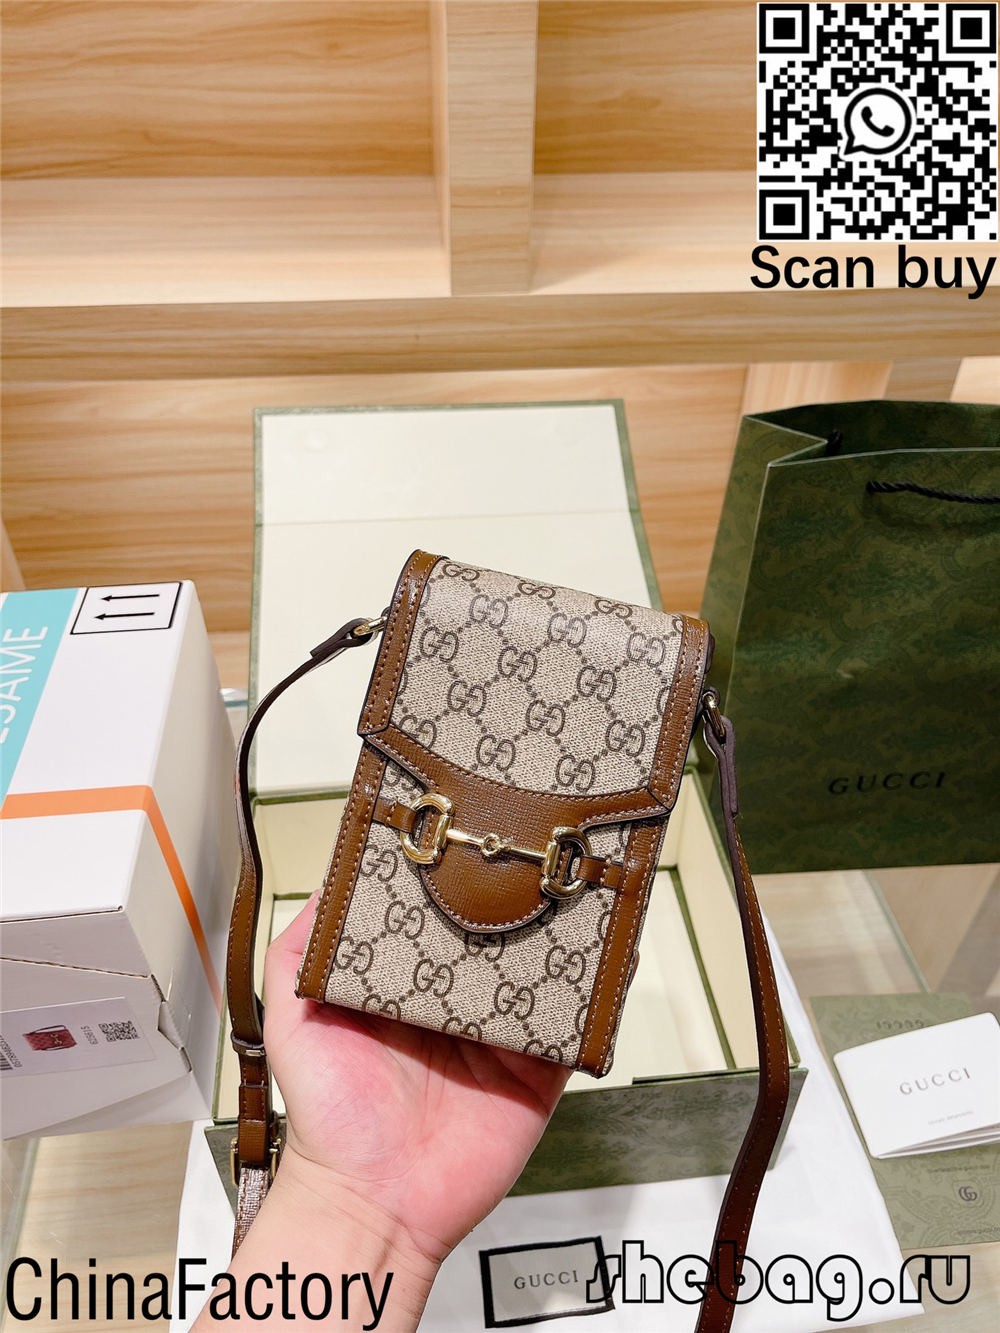 Which one should I buy for the first replica designer bag of my life? (2022 Edition)-Best Quality Fake Louis Vuitton Bag Online Store, Replica designer bag ru